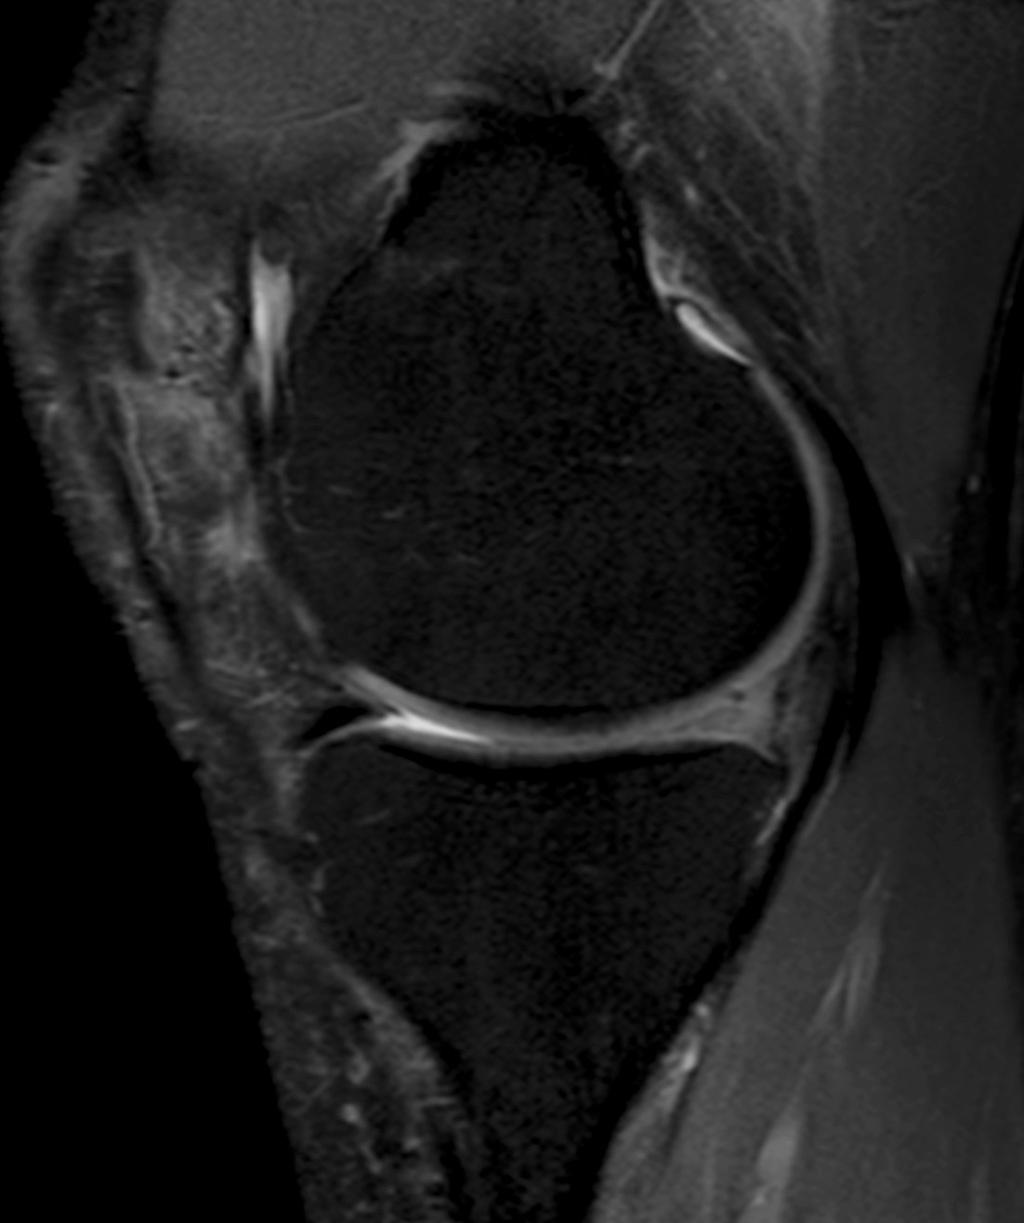 Conversely, PRP administration at the end of open meniscal repair improved clinical outcomes at 24 months follow-up in a casecontrol study 17.